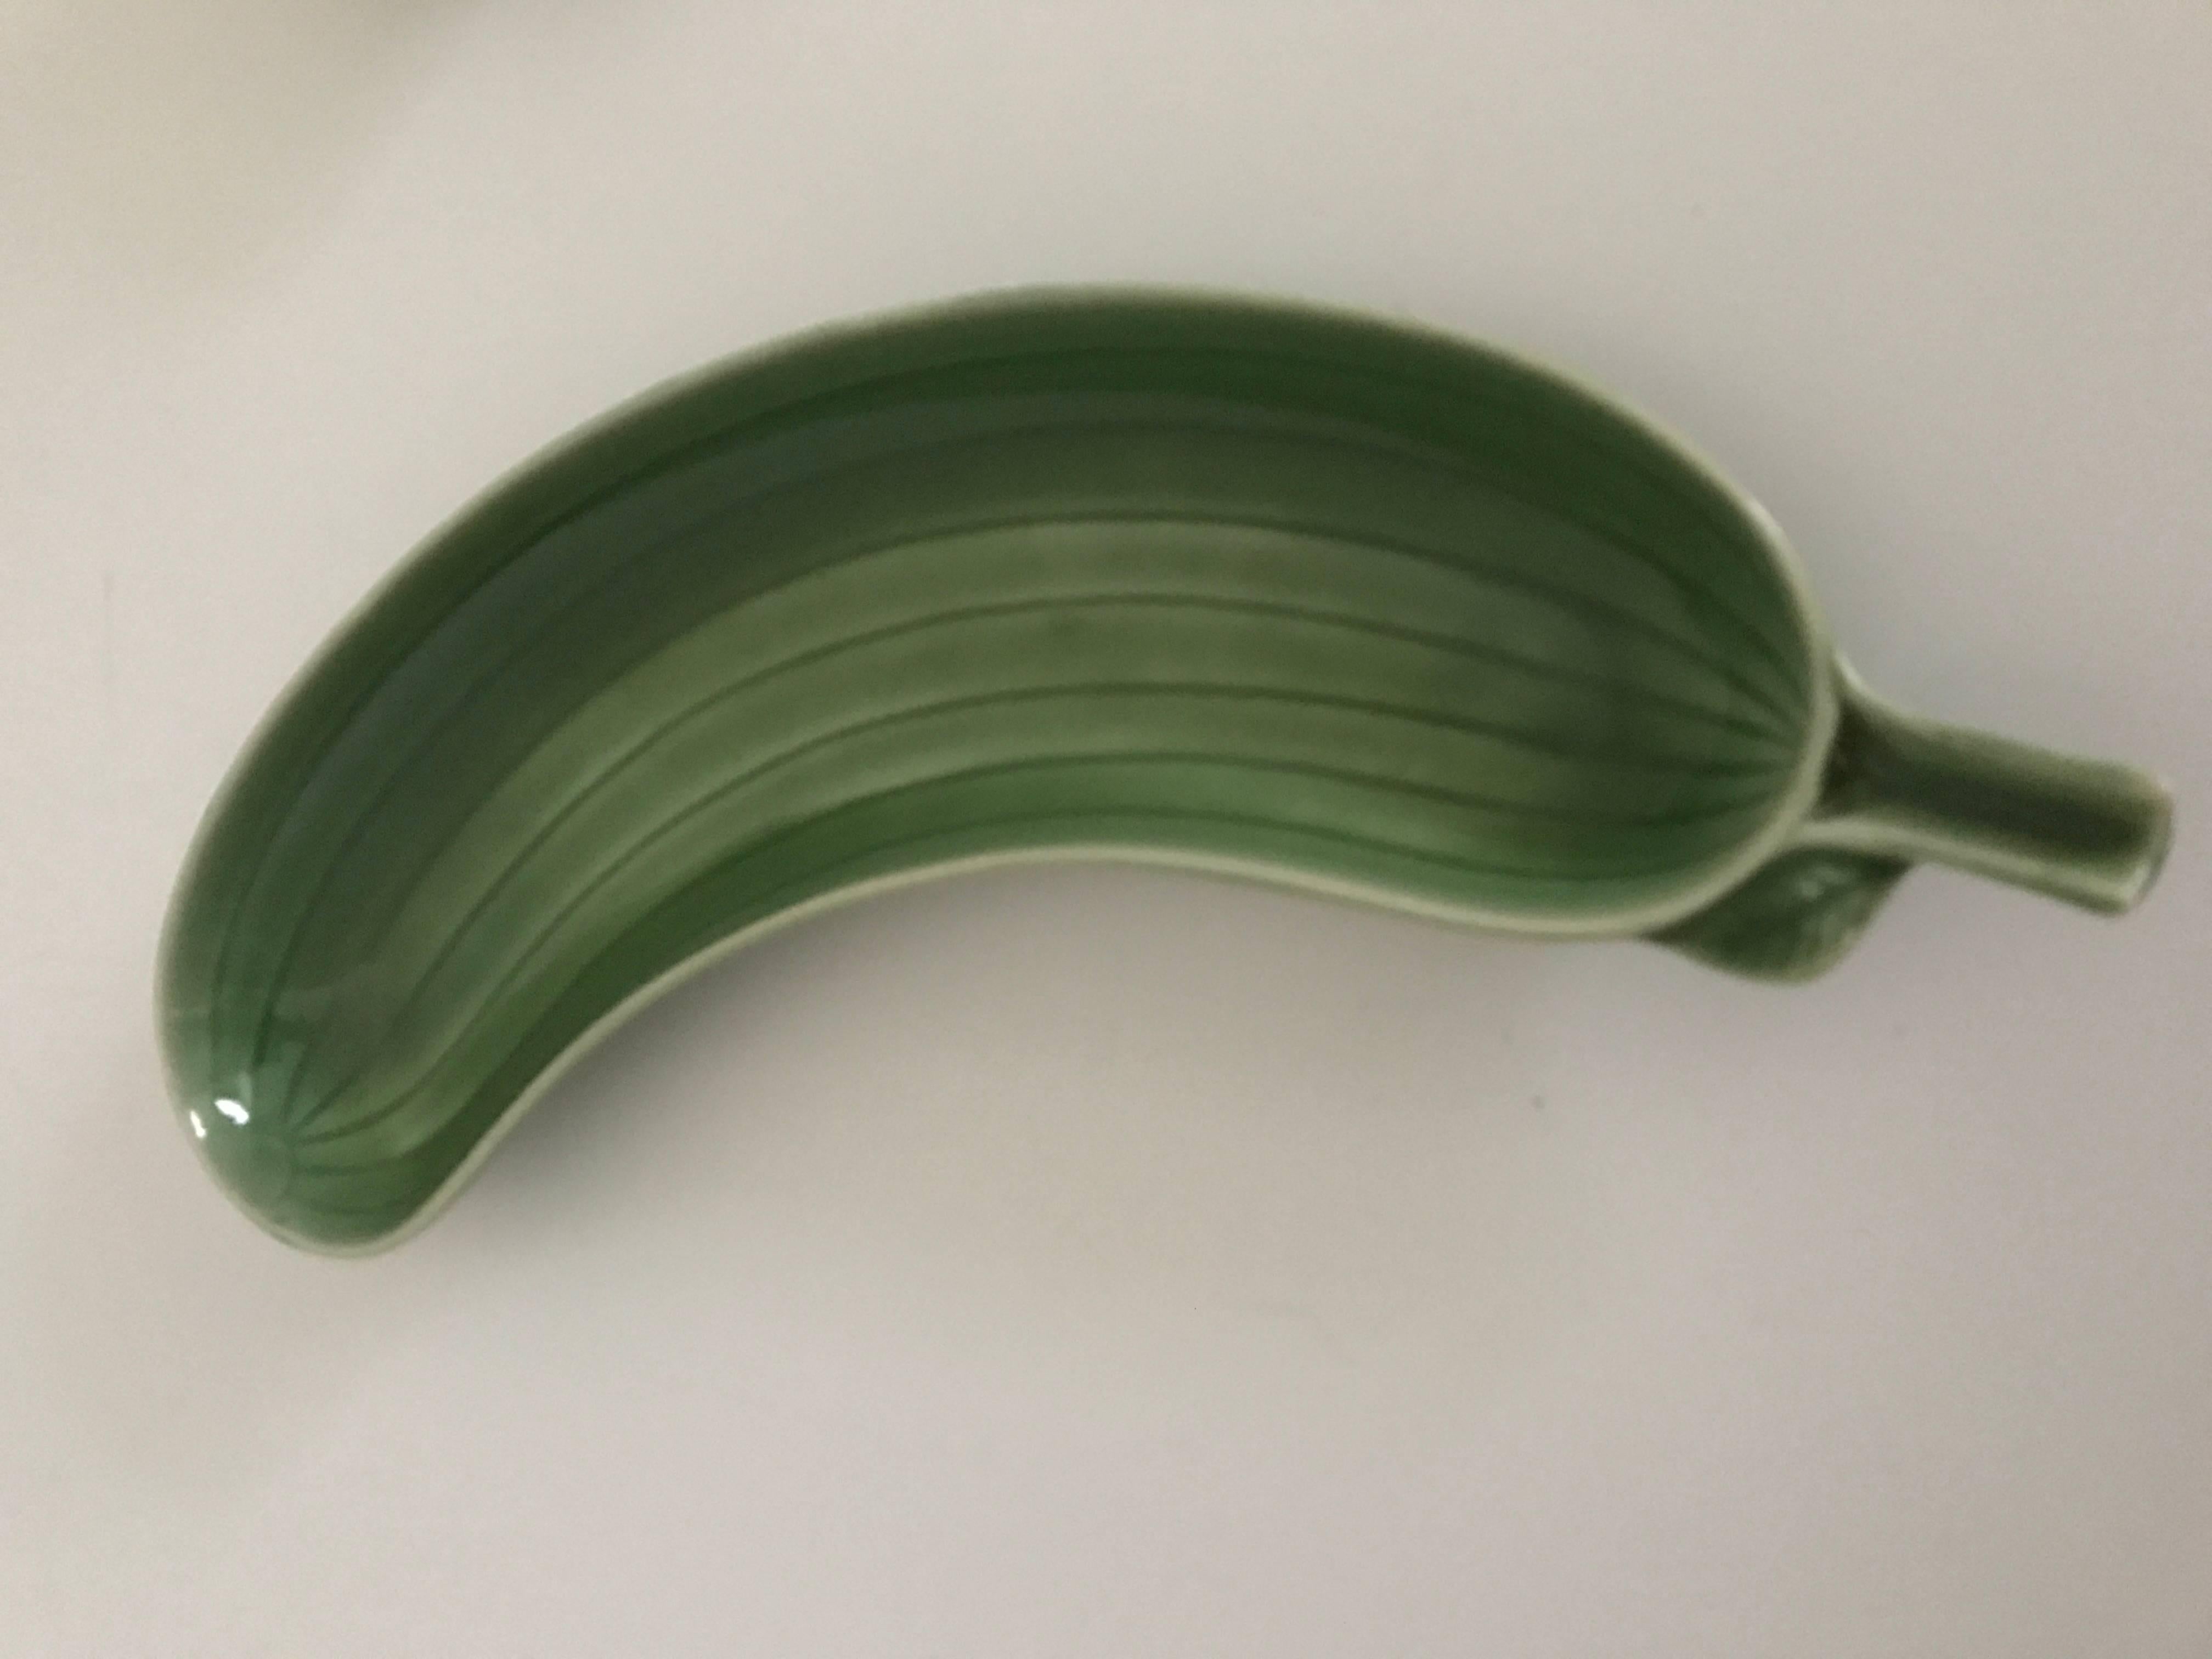 Late 20th century Gustavsberg Stig Lindberg Swedish ceramic cucumber dish.
A beautiful and funny set of four serving dishes shaped like a cucumber. These dishes are made and designed by one of Sweden´s most famous ceramic artists, Stig Lindberg at